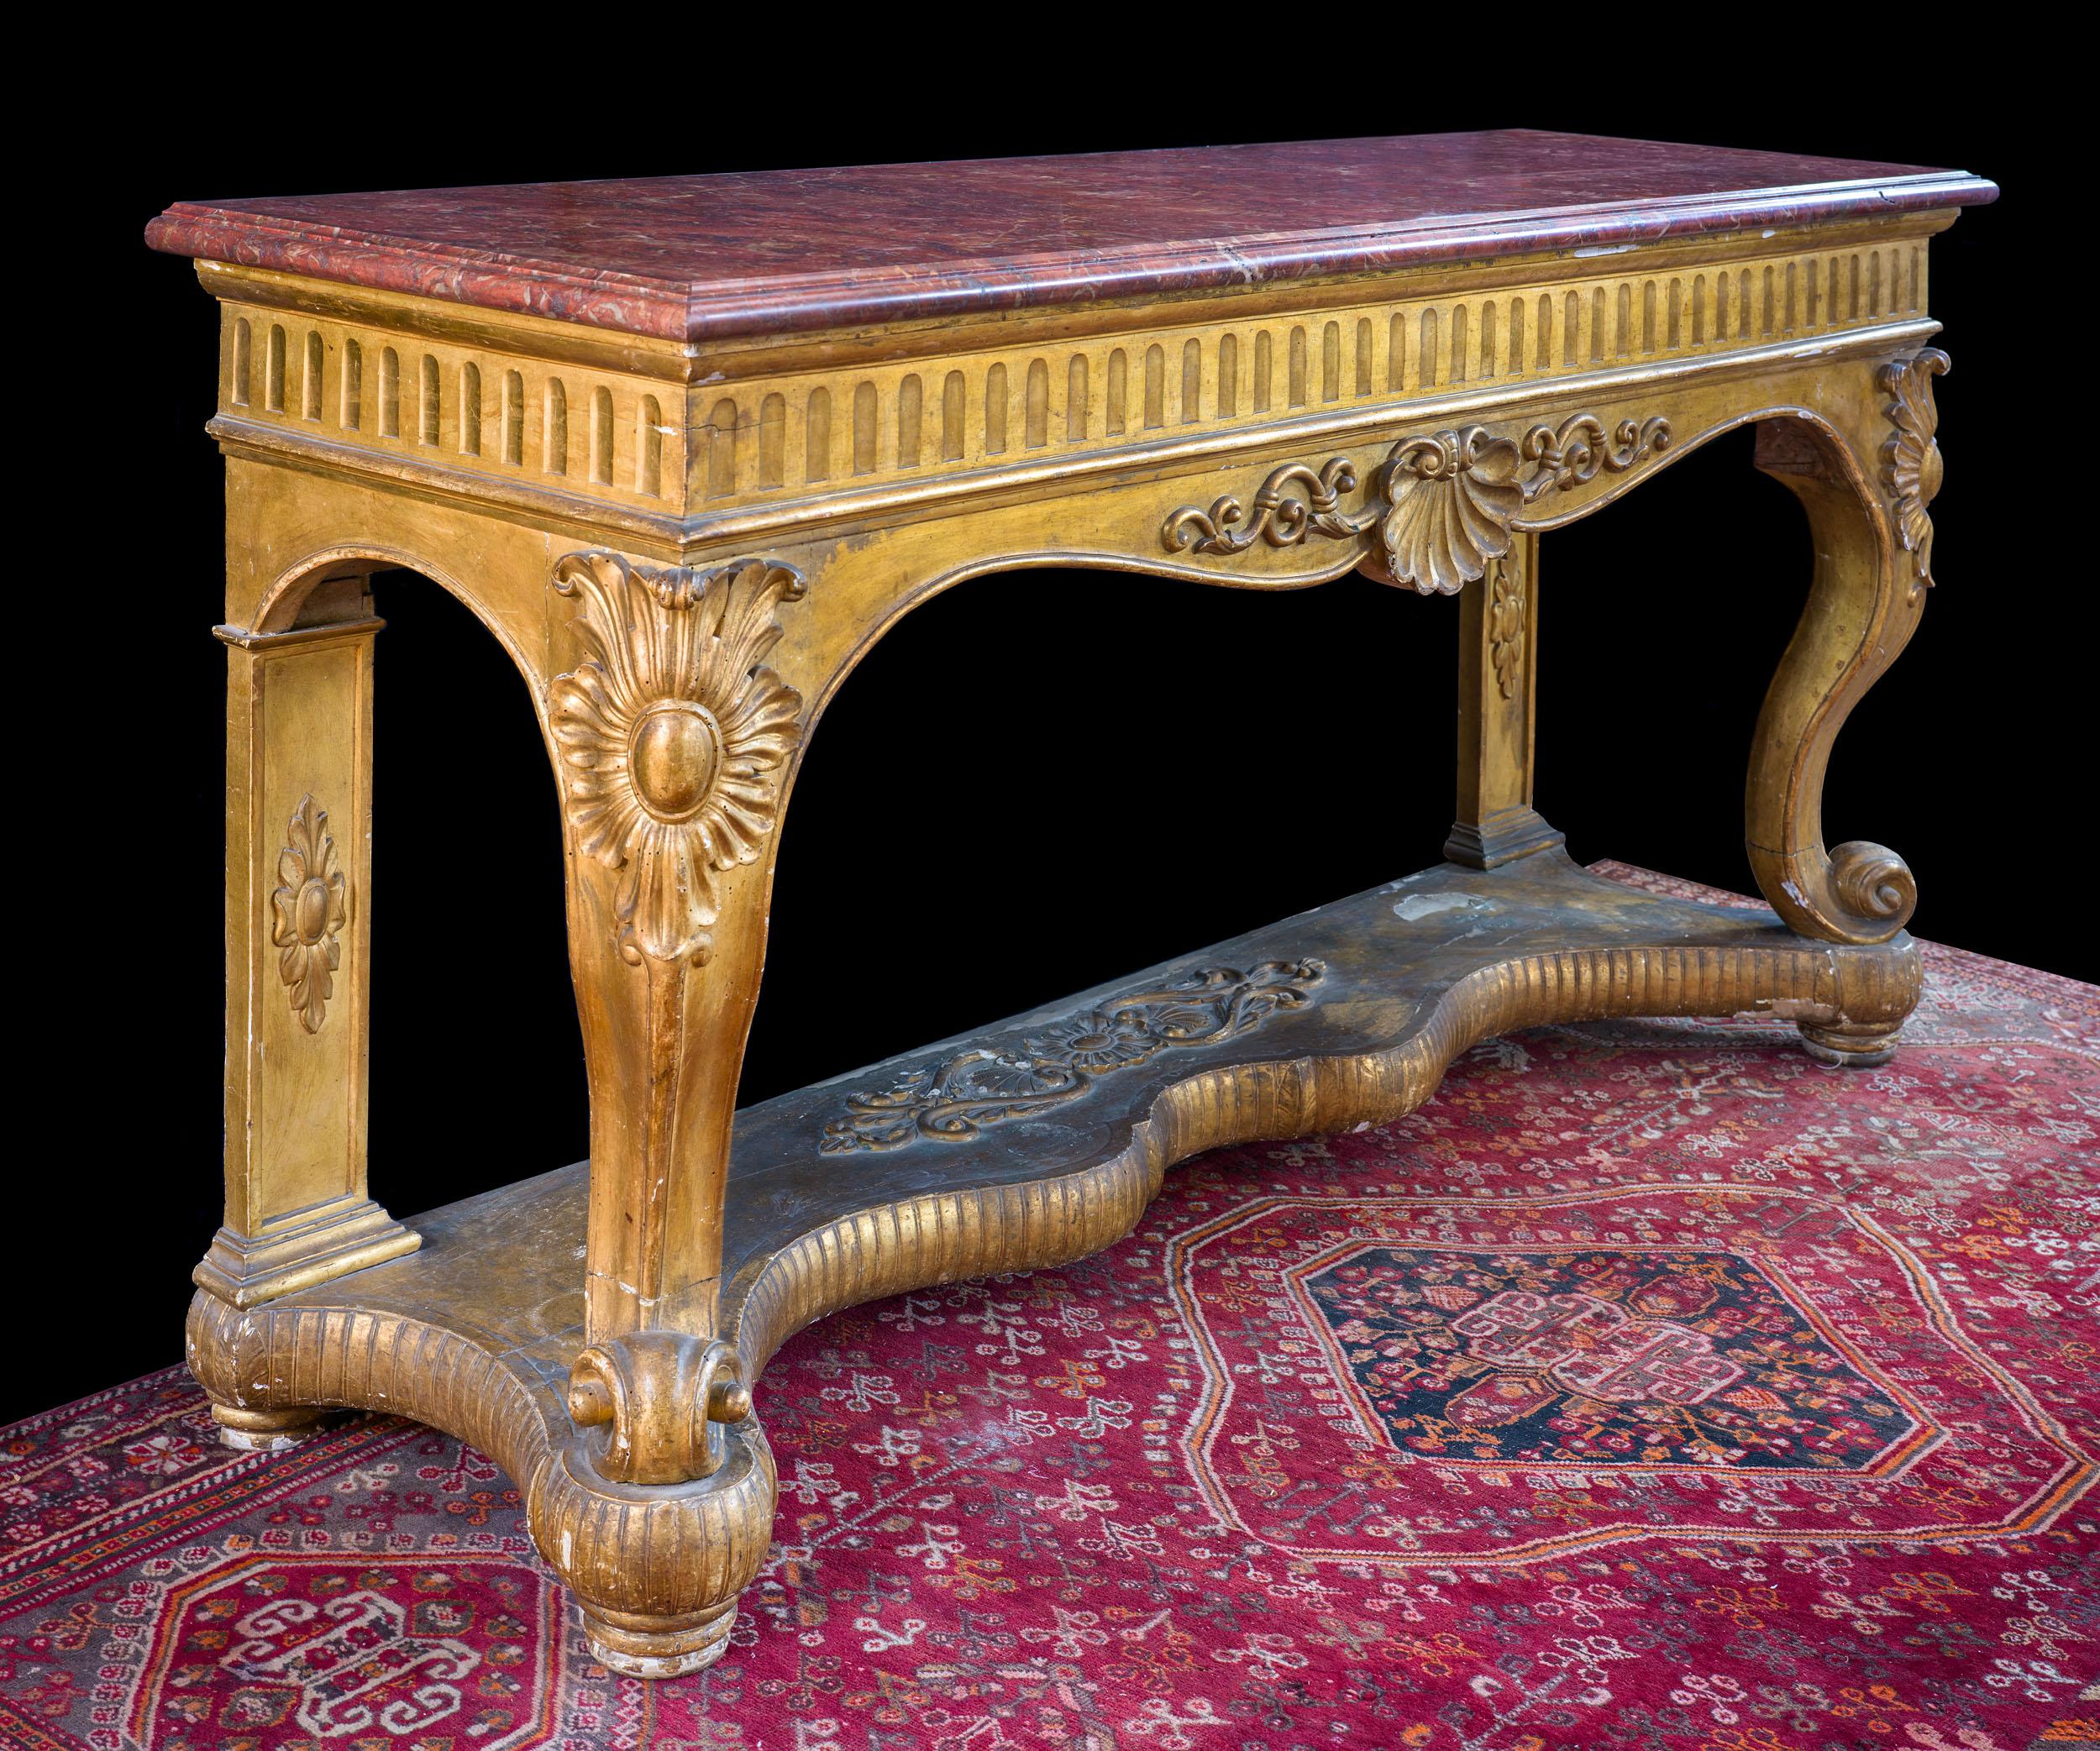 A fine and large giltwood Italian console or game table. The substantial rouge royale marble top is supported by a fluted frieze on a serpentine frame, centred by a scallop shell on snail feet over an unusual serpentine stretcher.

Italian, c.1820.